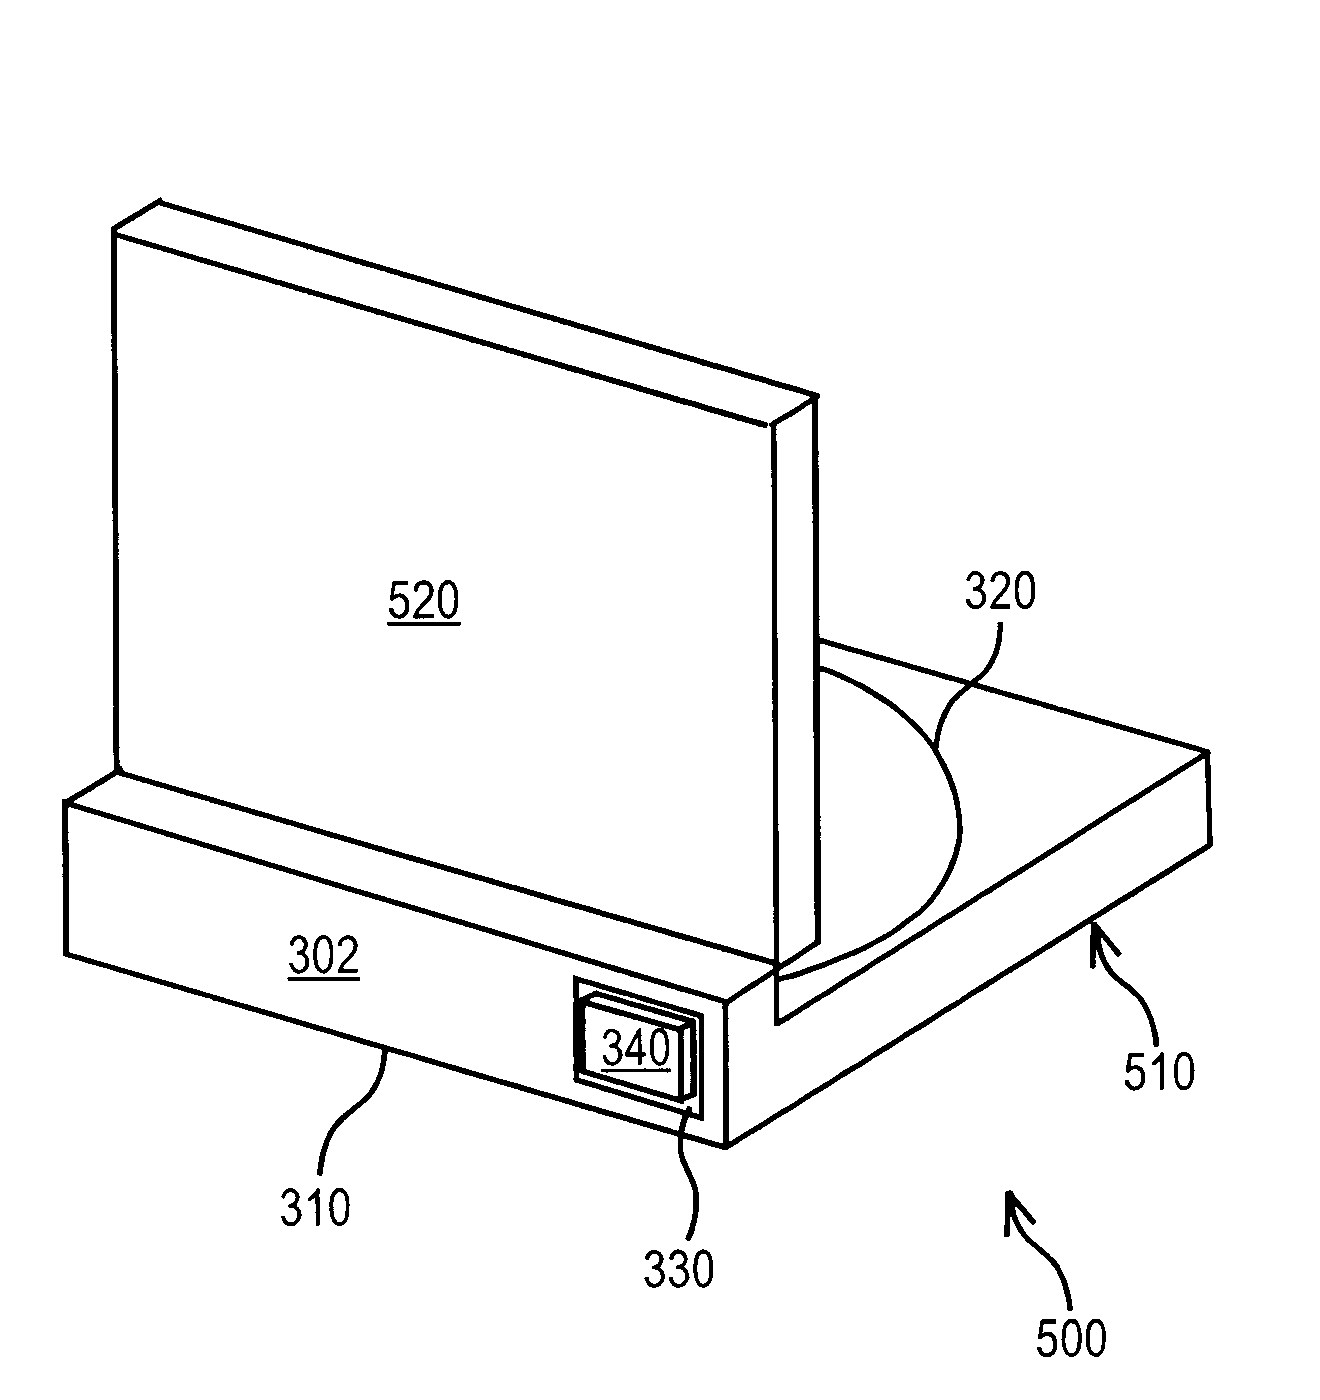 Portable data storage cartridge comprising a first information storage medium and a second information storage medium